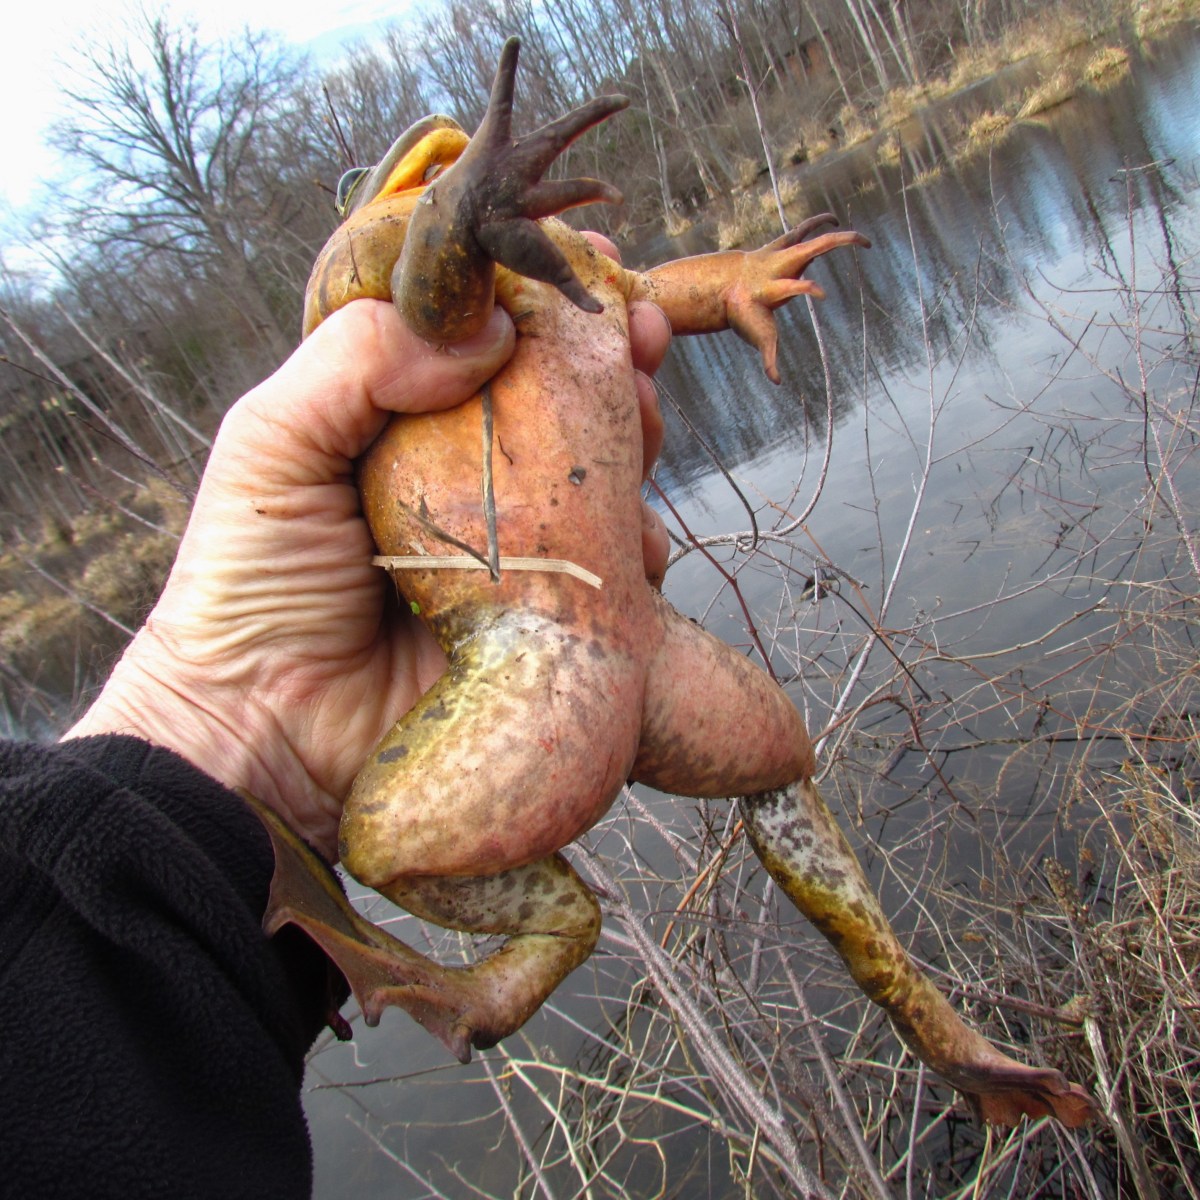 A bullfrog held in a human hand struggles to get free, the underside of its body is shown